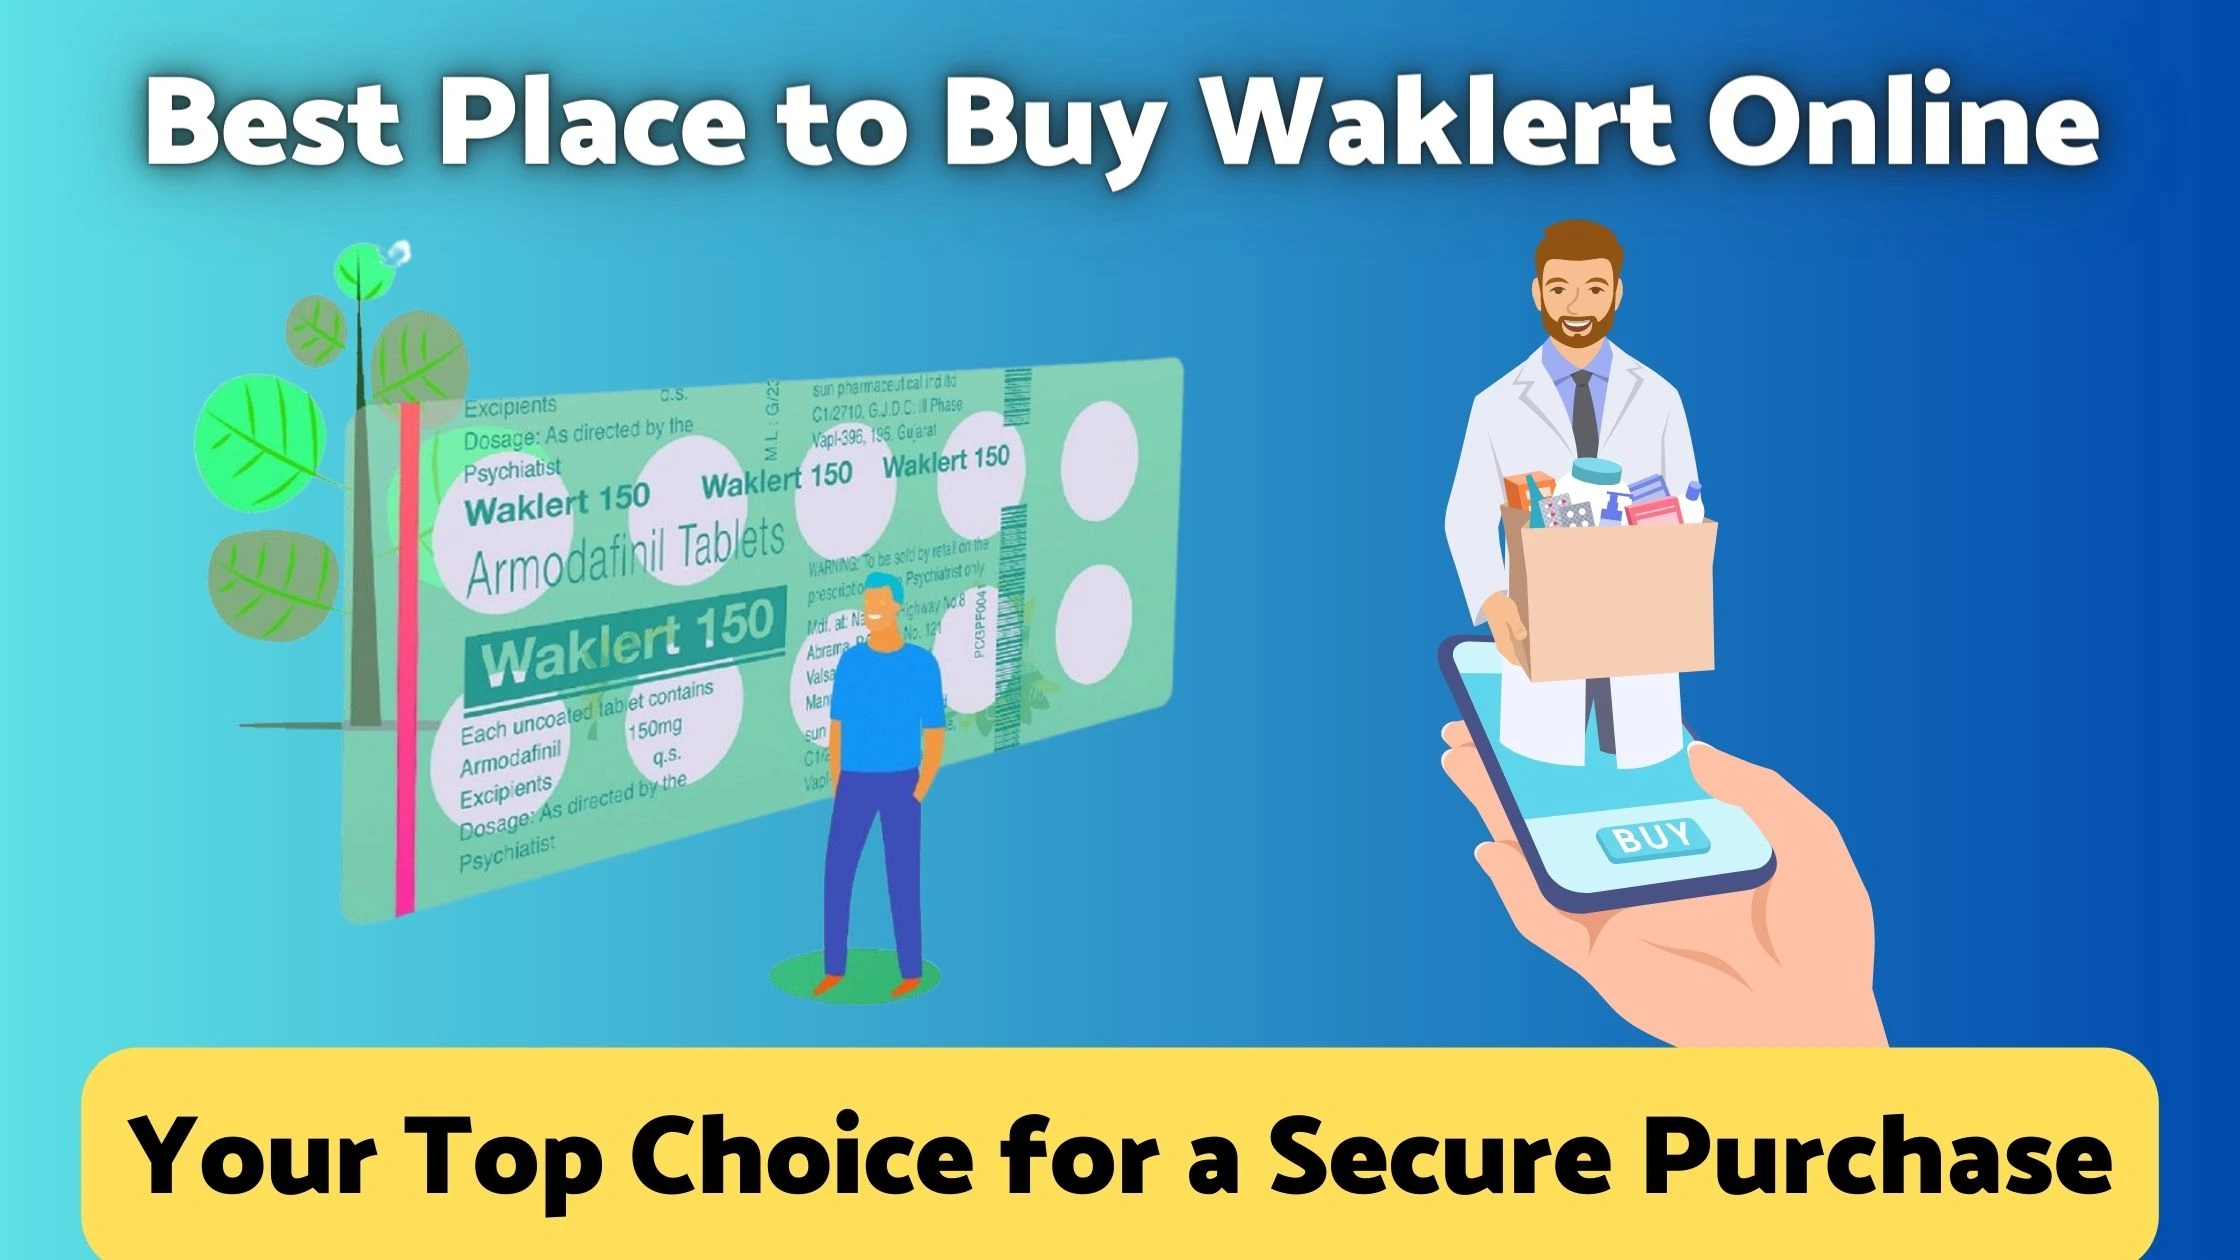 Best Place to Buy Waklert Online: Your Top Choice for a Secure Purchase